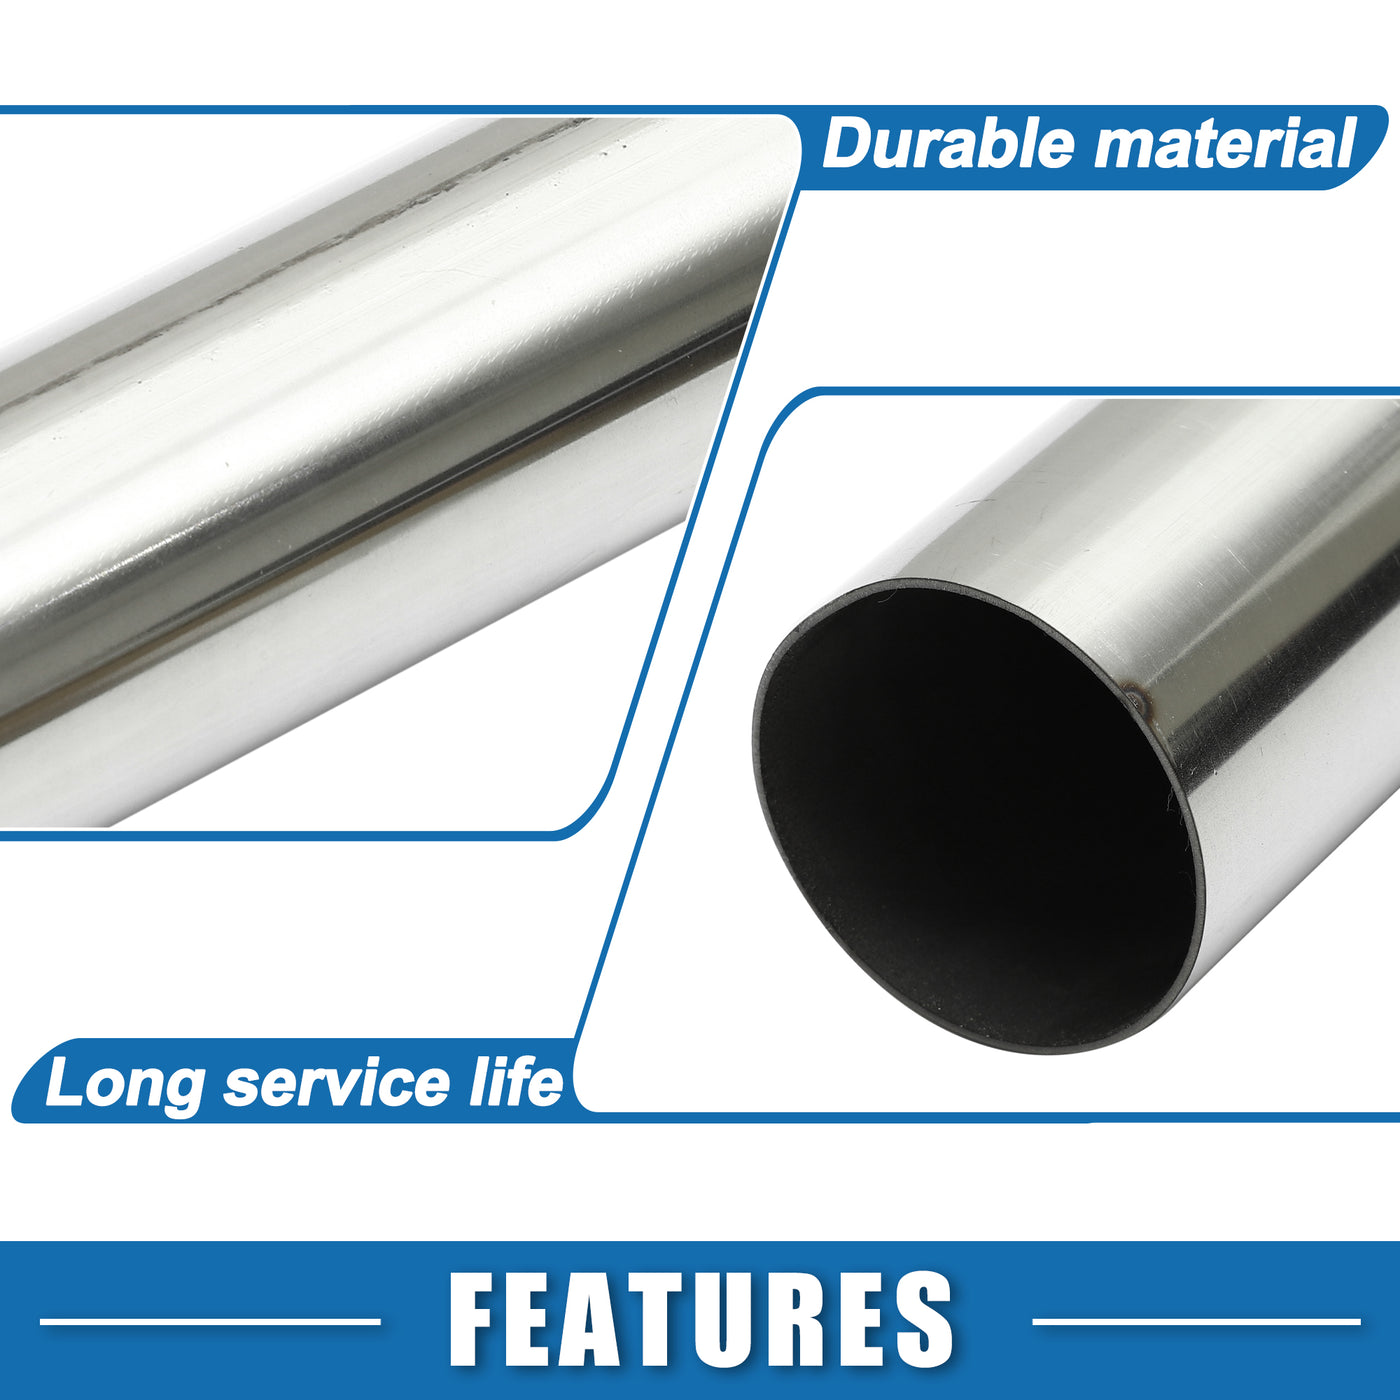 A ABSOPRO Car Mandrel Exhaust Pipe Tube Durable 48" Length 2.25'' OD Straight Exhaust Tube DIY Custom 0 Degree Modified Piping T304 Stainless Steel (Set of 2)